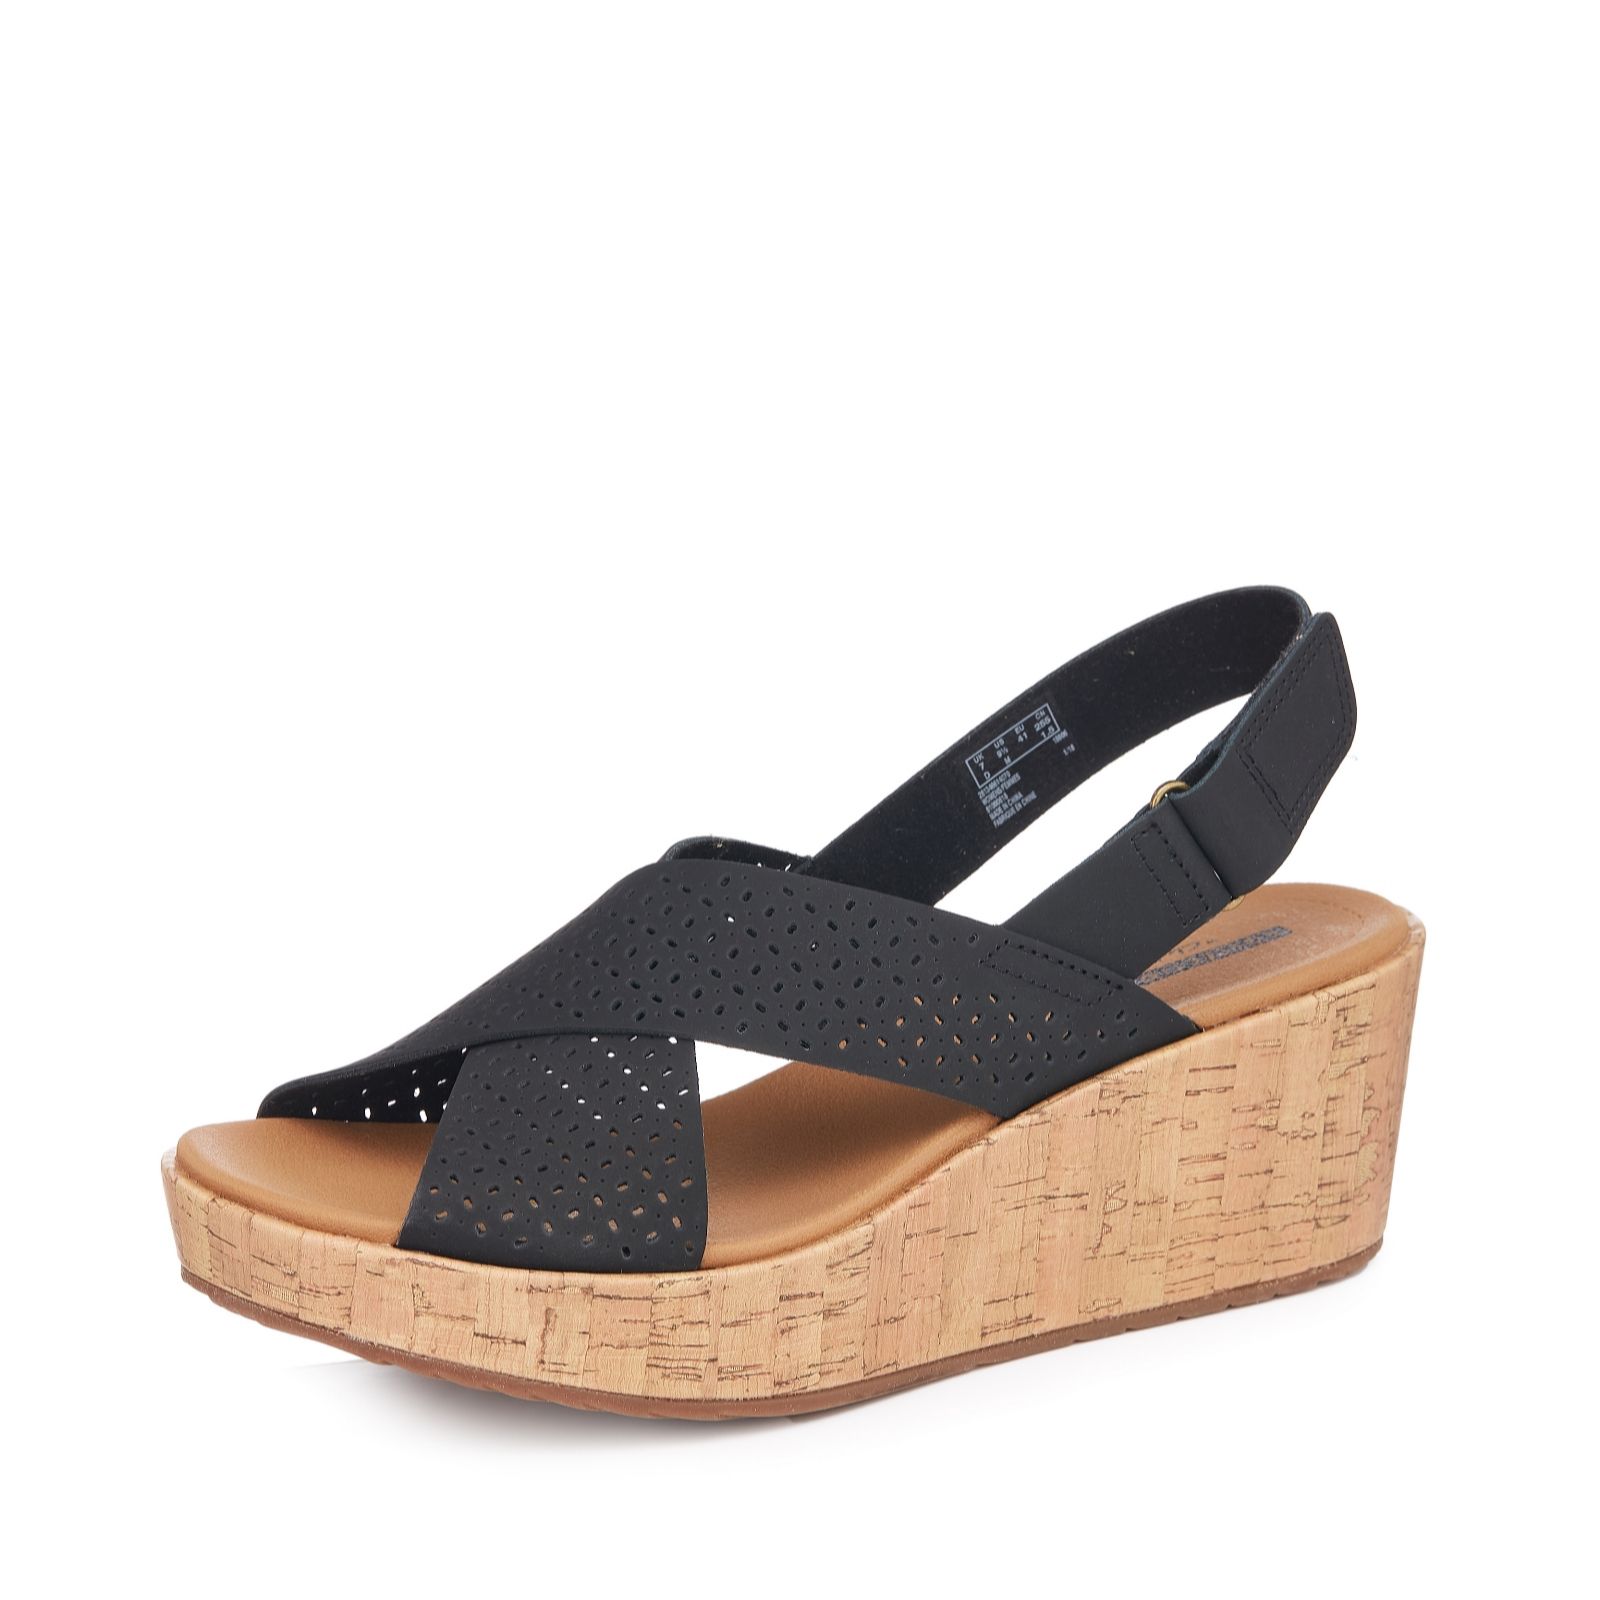 clarks leather wedges